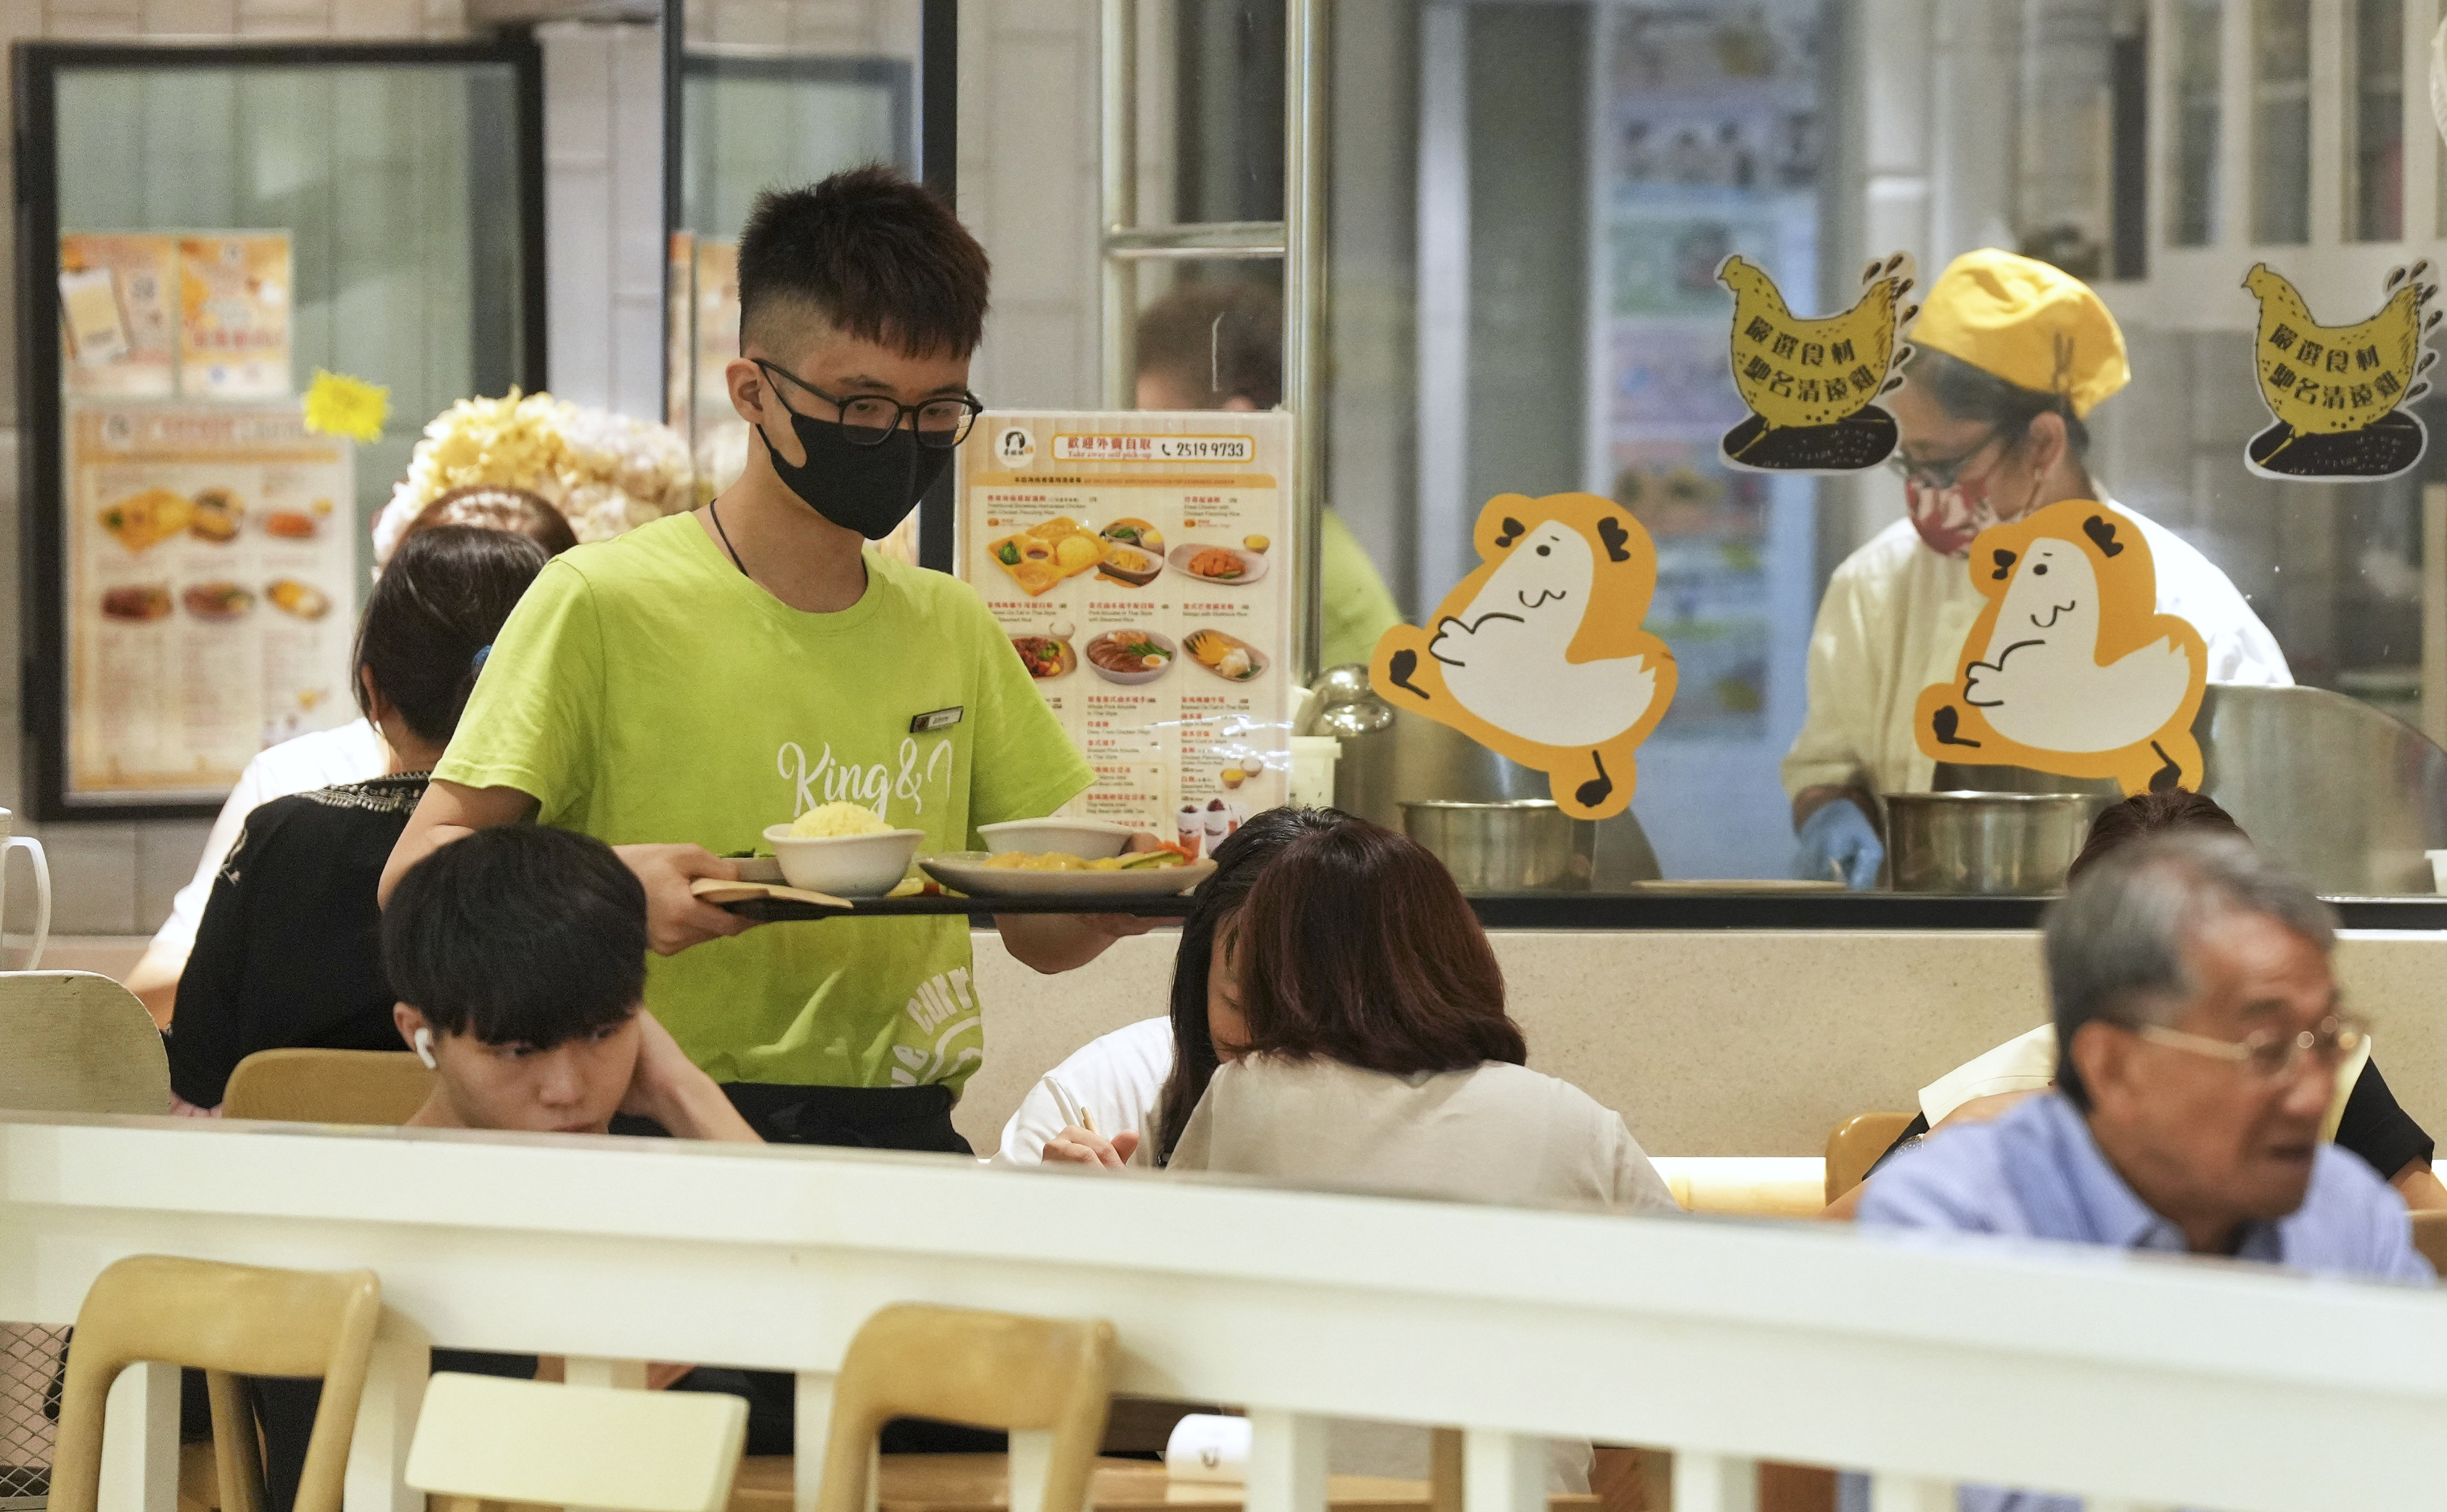 The restaurant industry hopes National Day price cuts of up to 30 per cent will boost business. Photo: Elson LI